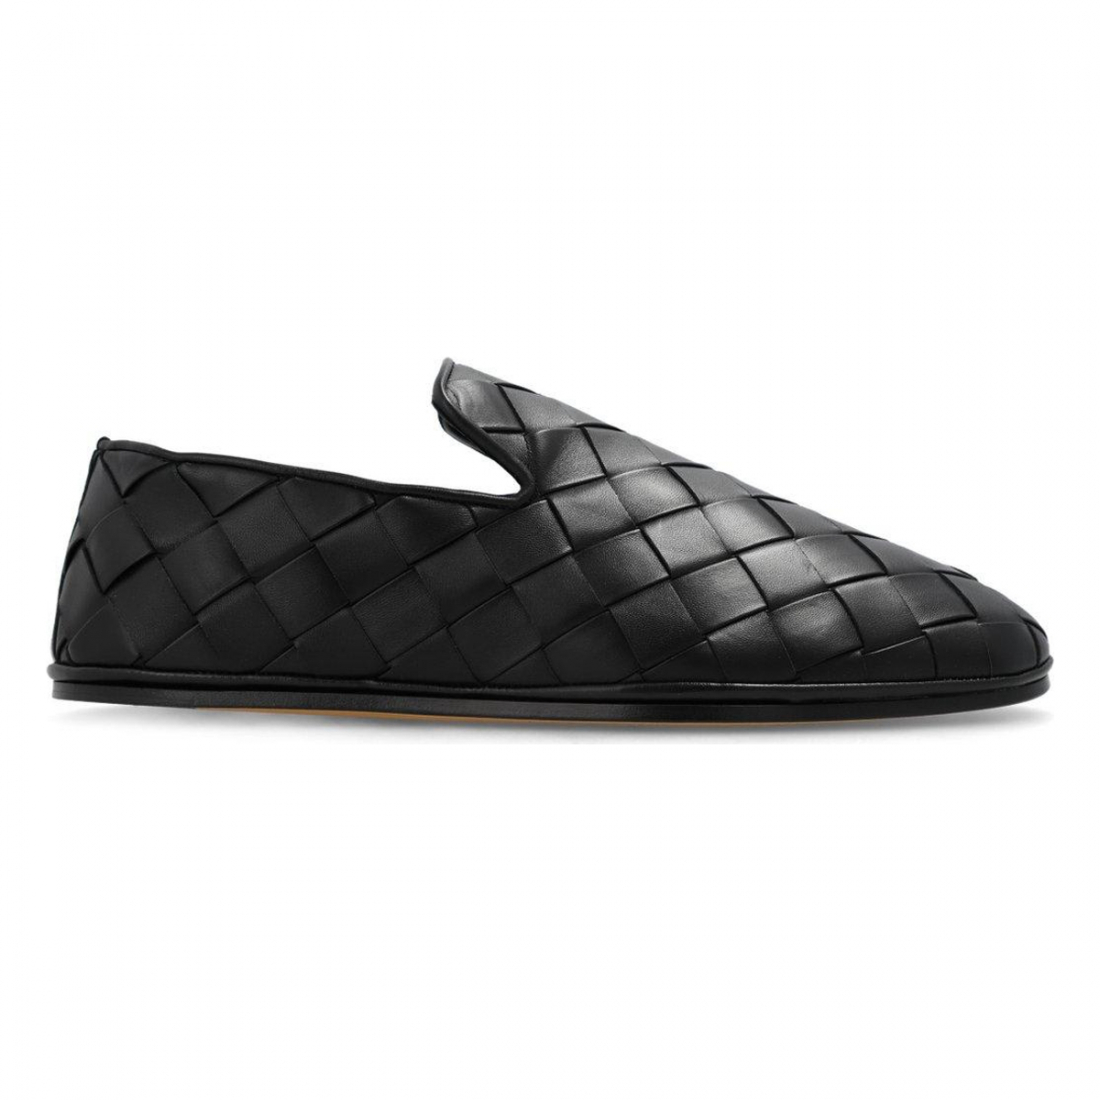 Chaussures Slip On 'Sunday' pour Hommes